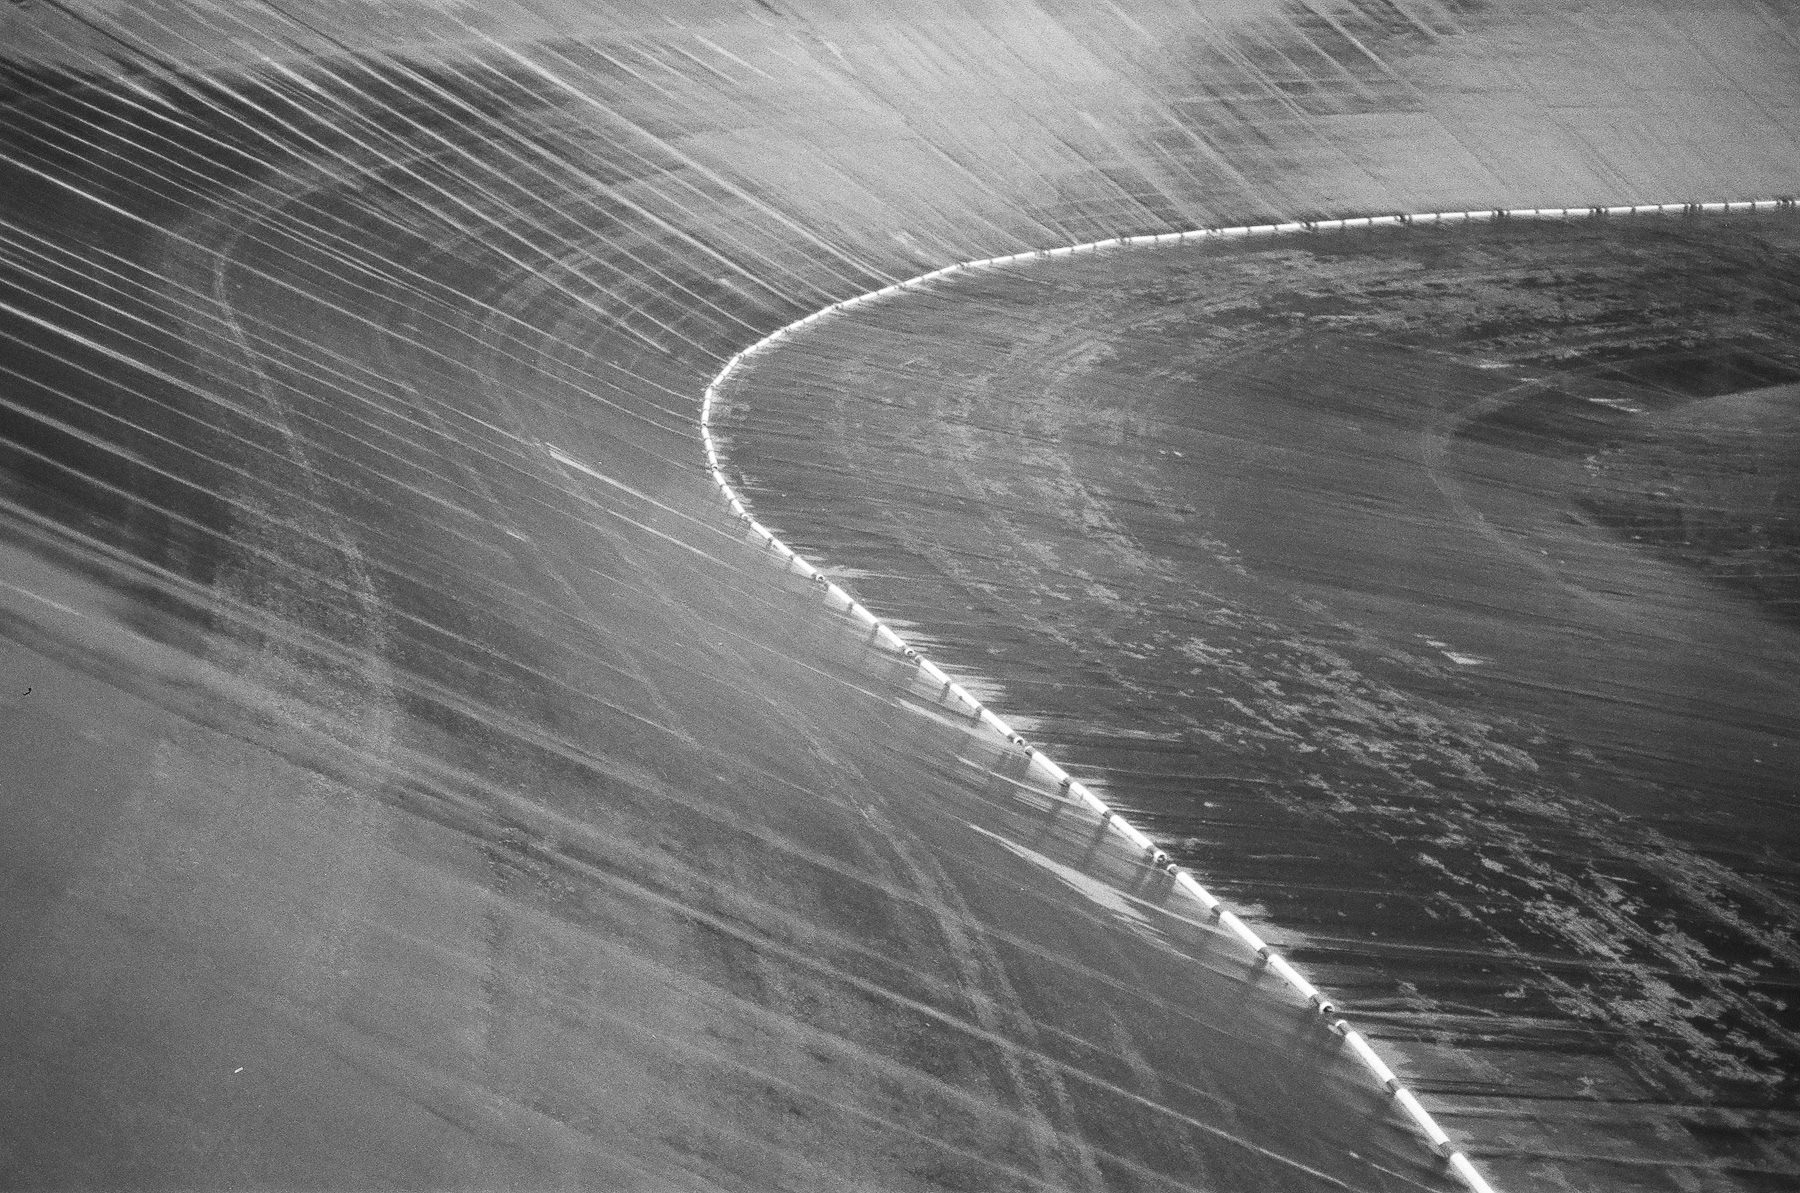 Grainy black and white film photo of an empty reservoir sloping wall with a curved shape.